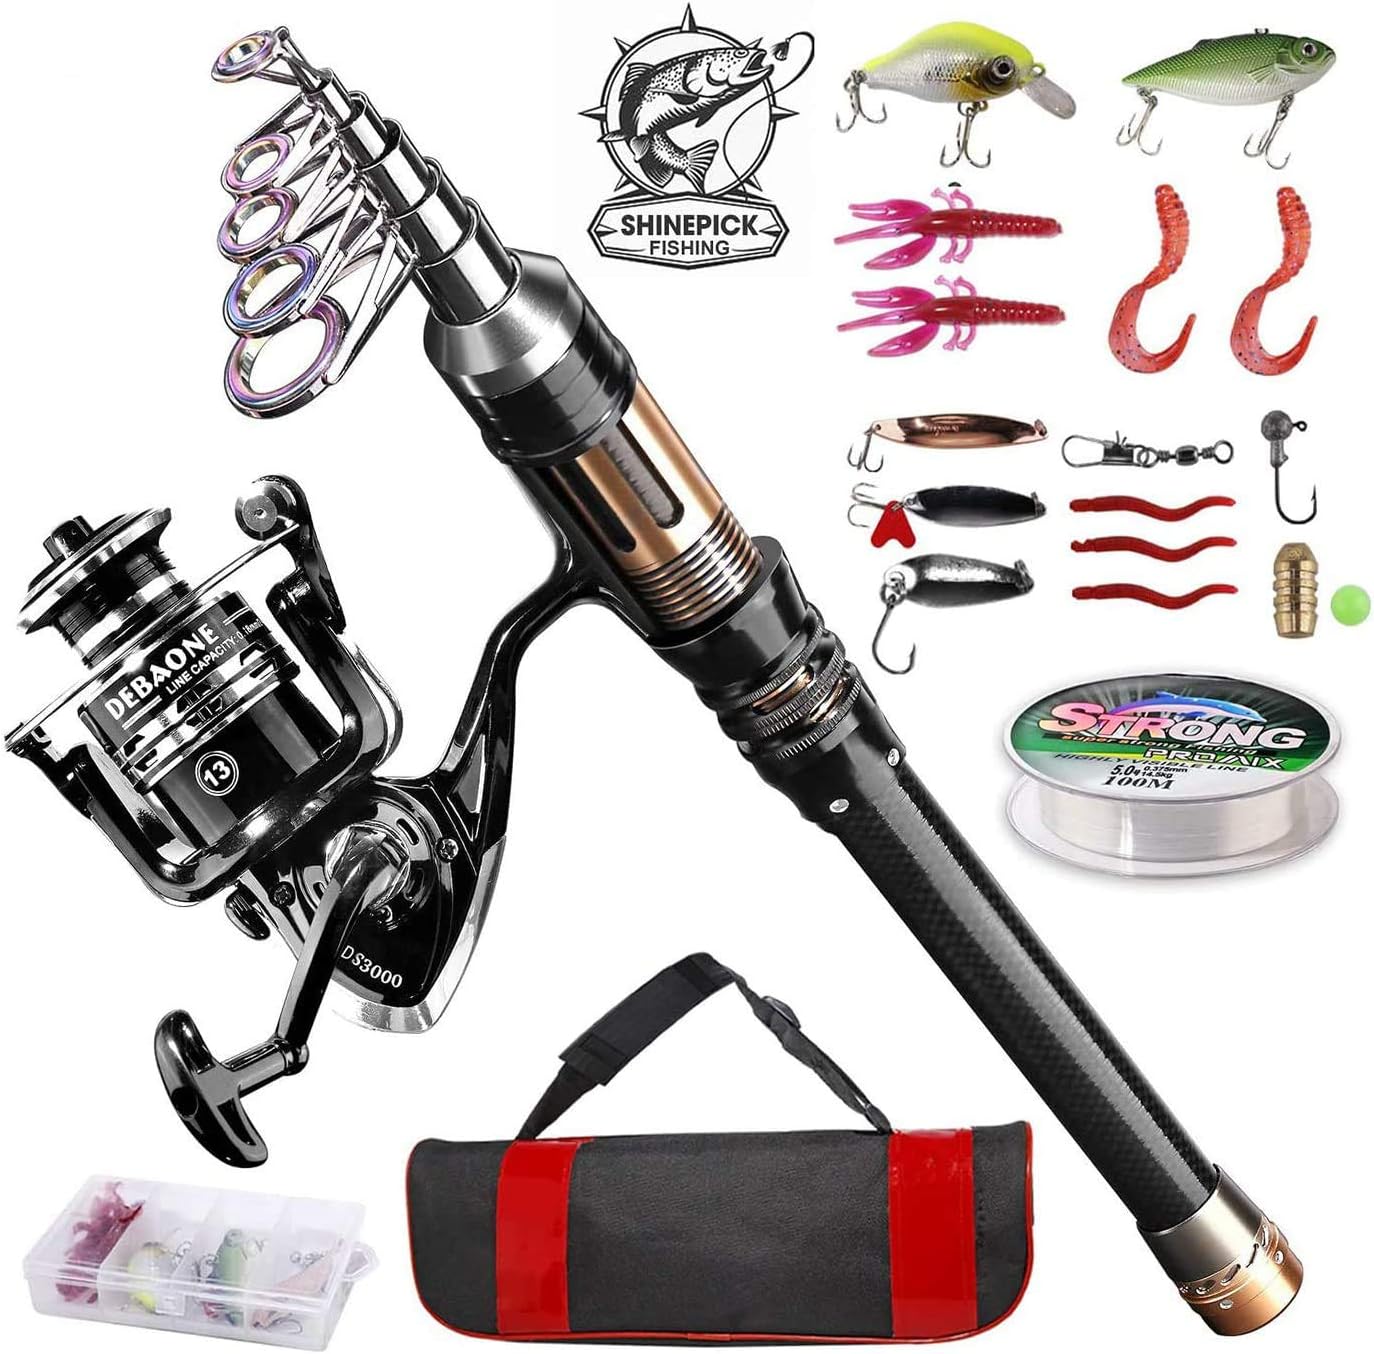 ShinePick Fishing Rod Kit, Telescopic Fishing Pole and Reel Combo Full Kit with Line Lures Hooks Carrier Bag for Travel Saltwater Freshwater Boat Fishing Beginners - ShinePick Fishing Rod Kit Review